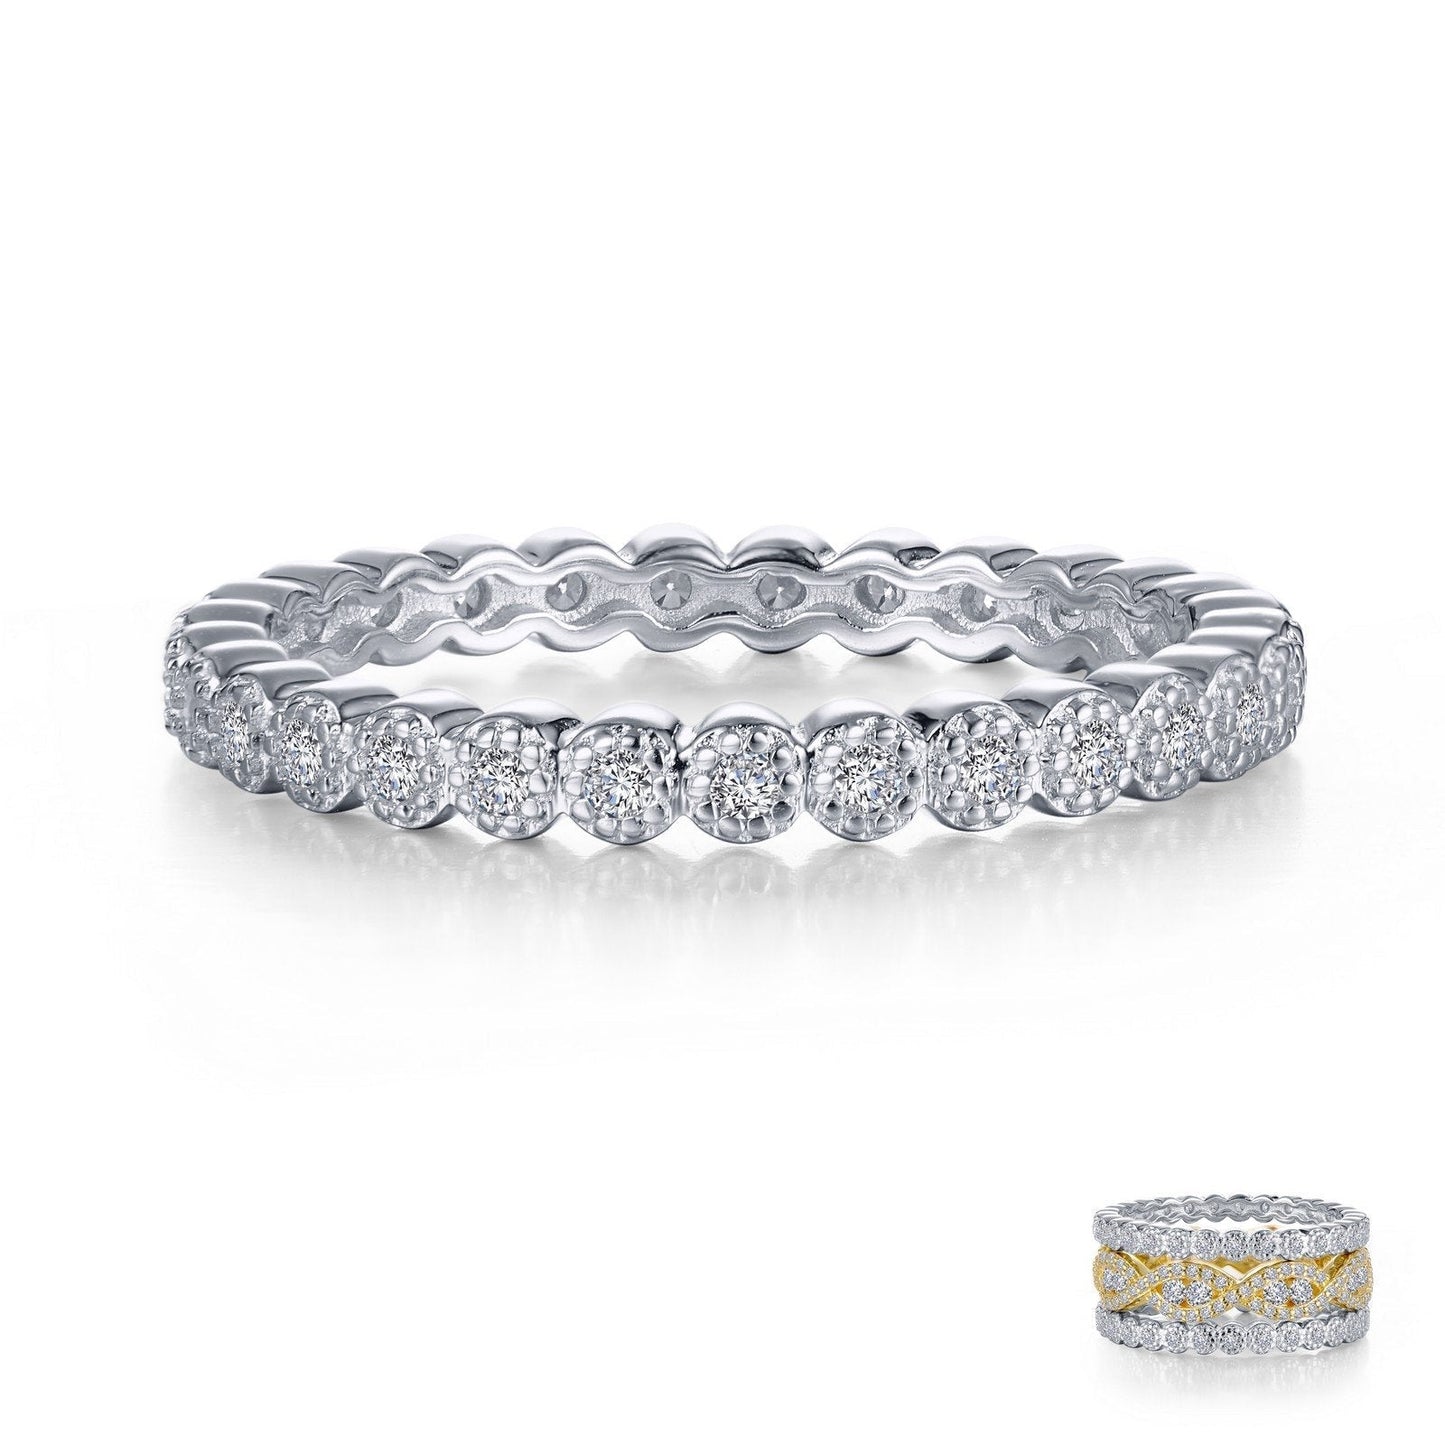 Lafonn 0.29 CTW Stackable Eternity Band Simulated Diamond RINGS Size 9 Platinum 0.29 CTS Approx.2.5mm(W)